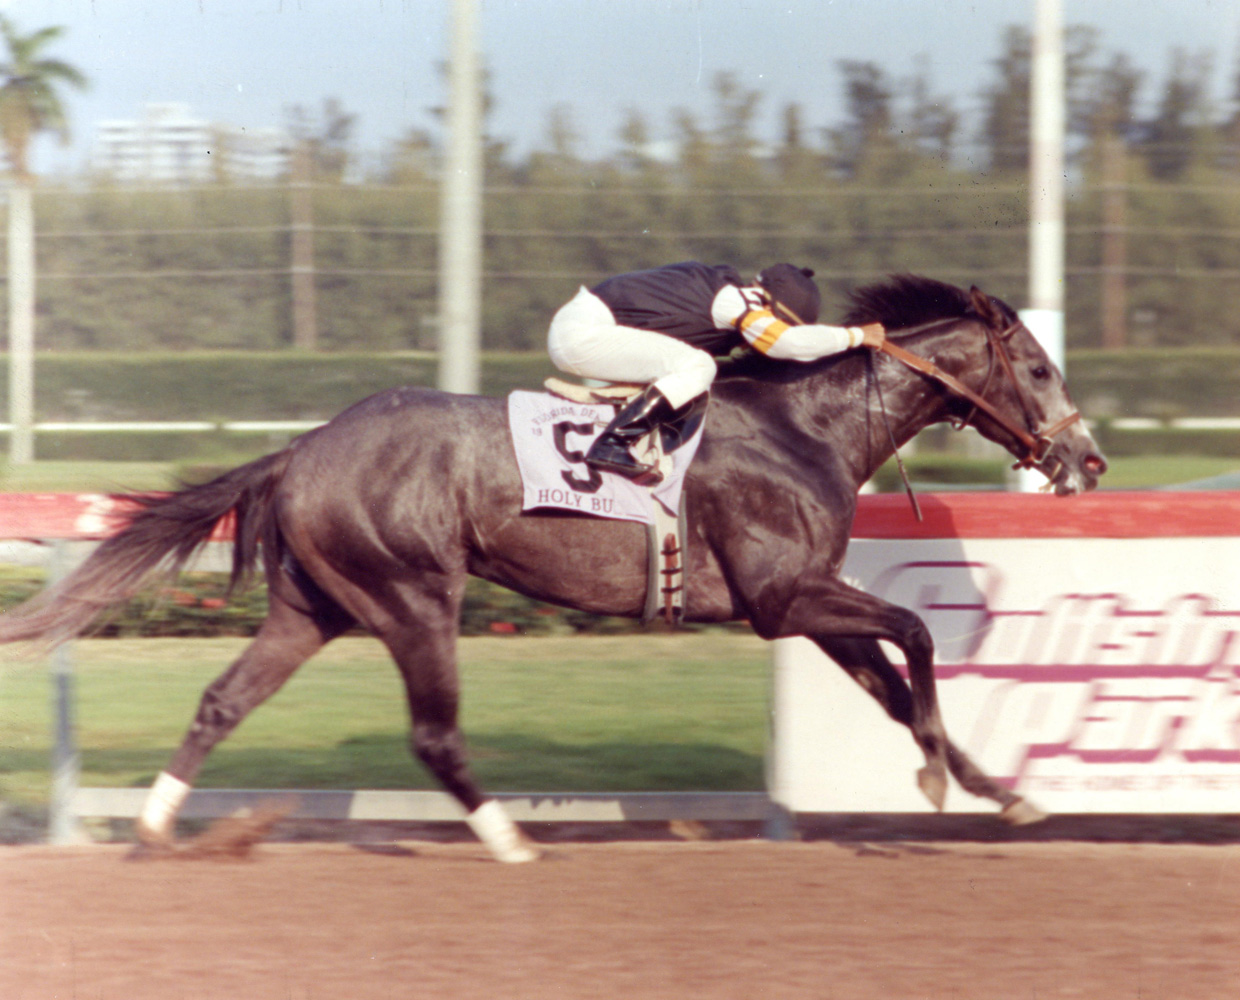 Holy Bull (Mike Smith up) winning the 1994 Florida Derby at Gulfstream Park (Turfotos/Museum Collection)